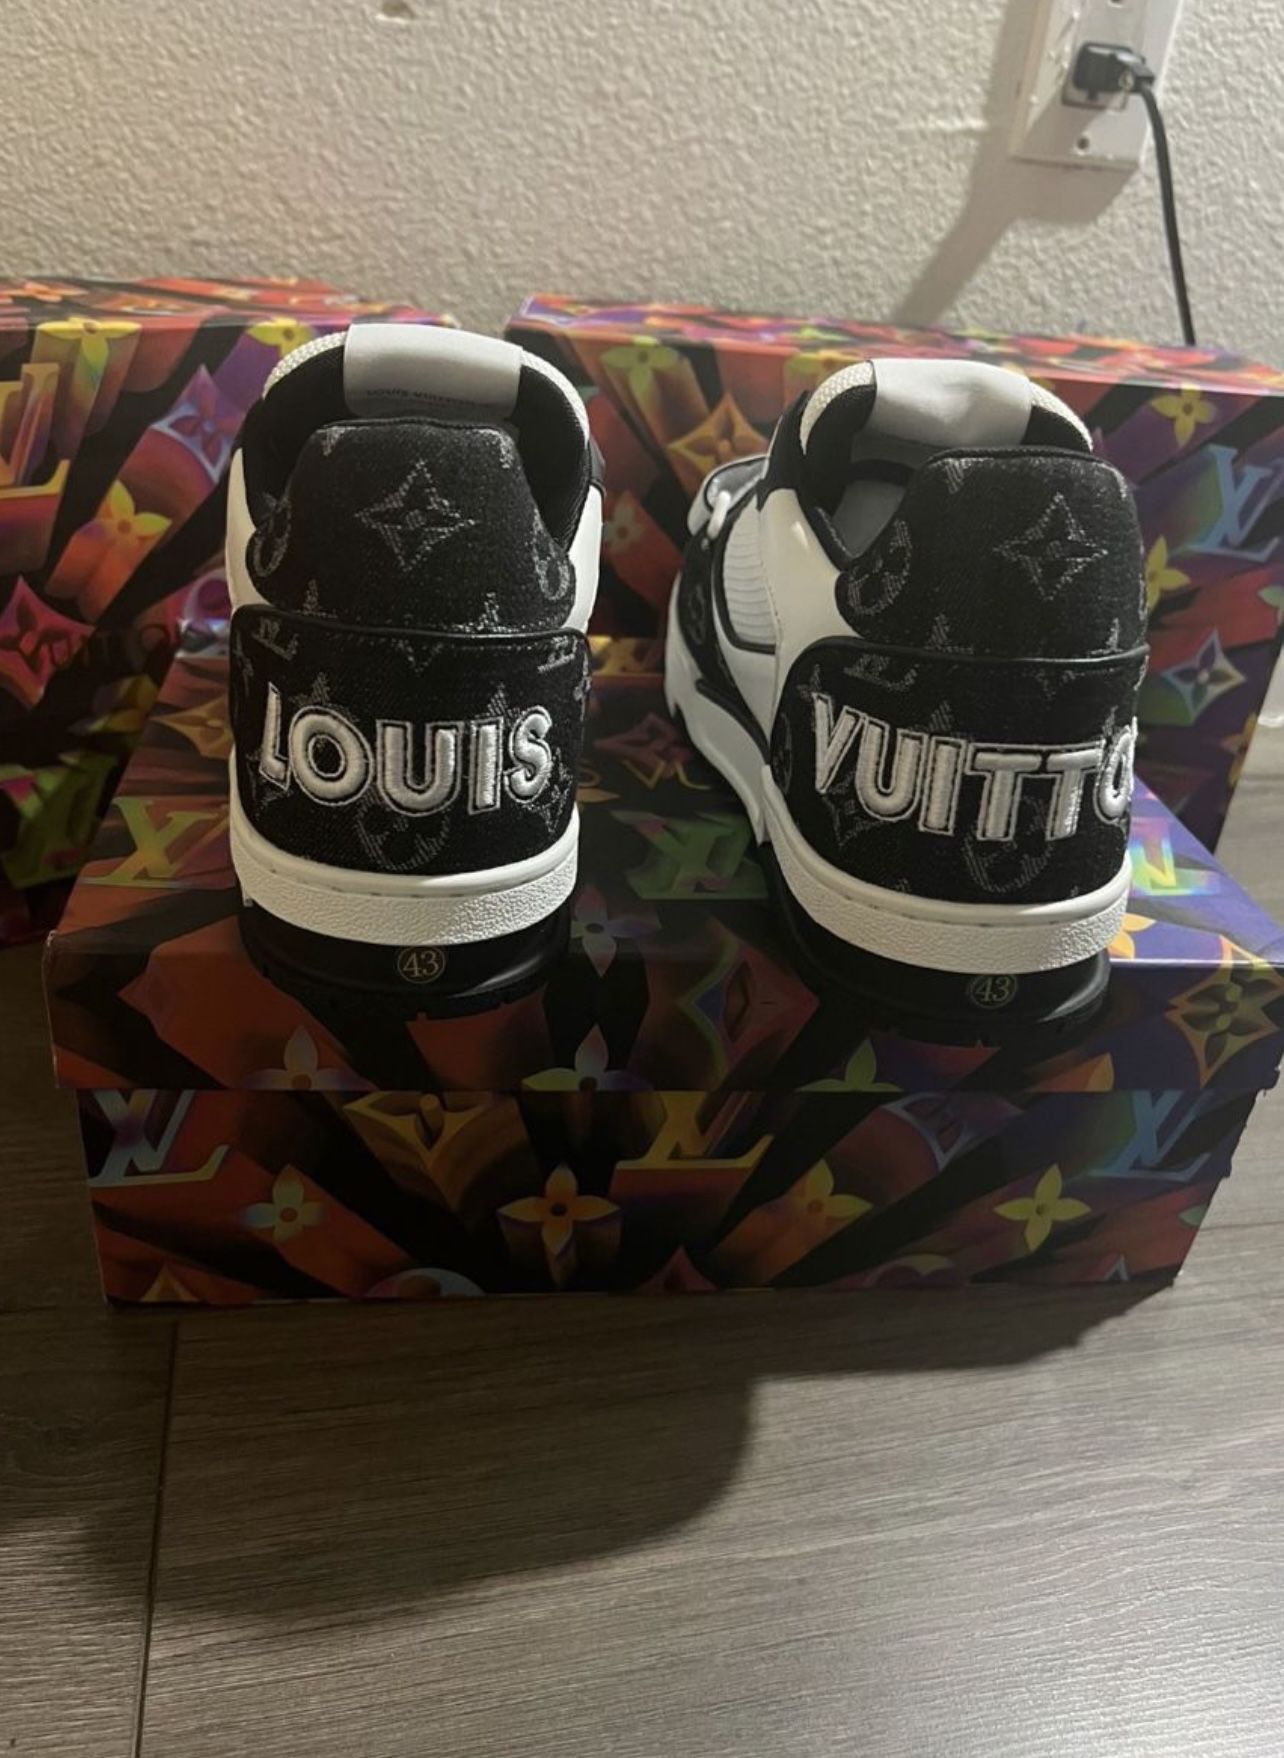 Louis Vuitton Trainer Sneaker for Sale in Los Angeles, CA - OfferUp